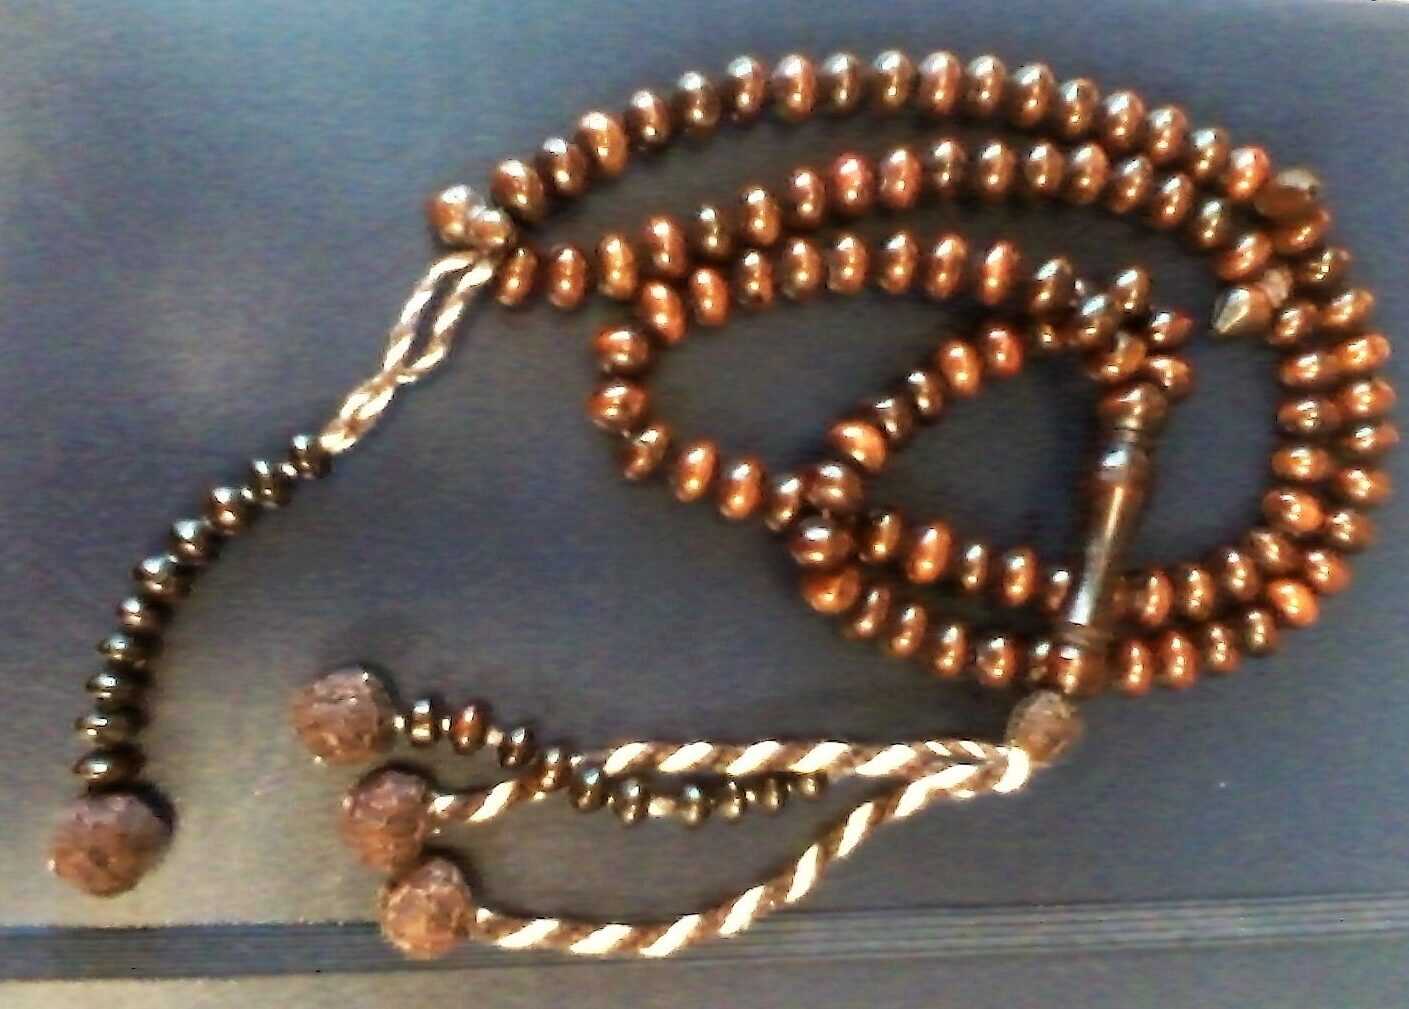 Photograph of a strand of prayer beads